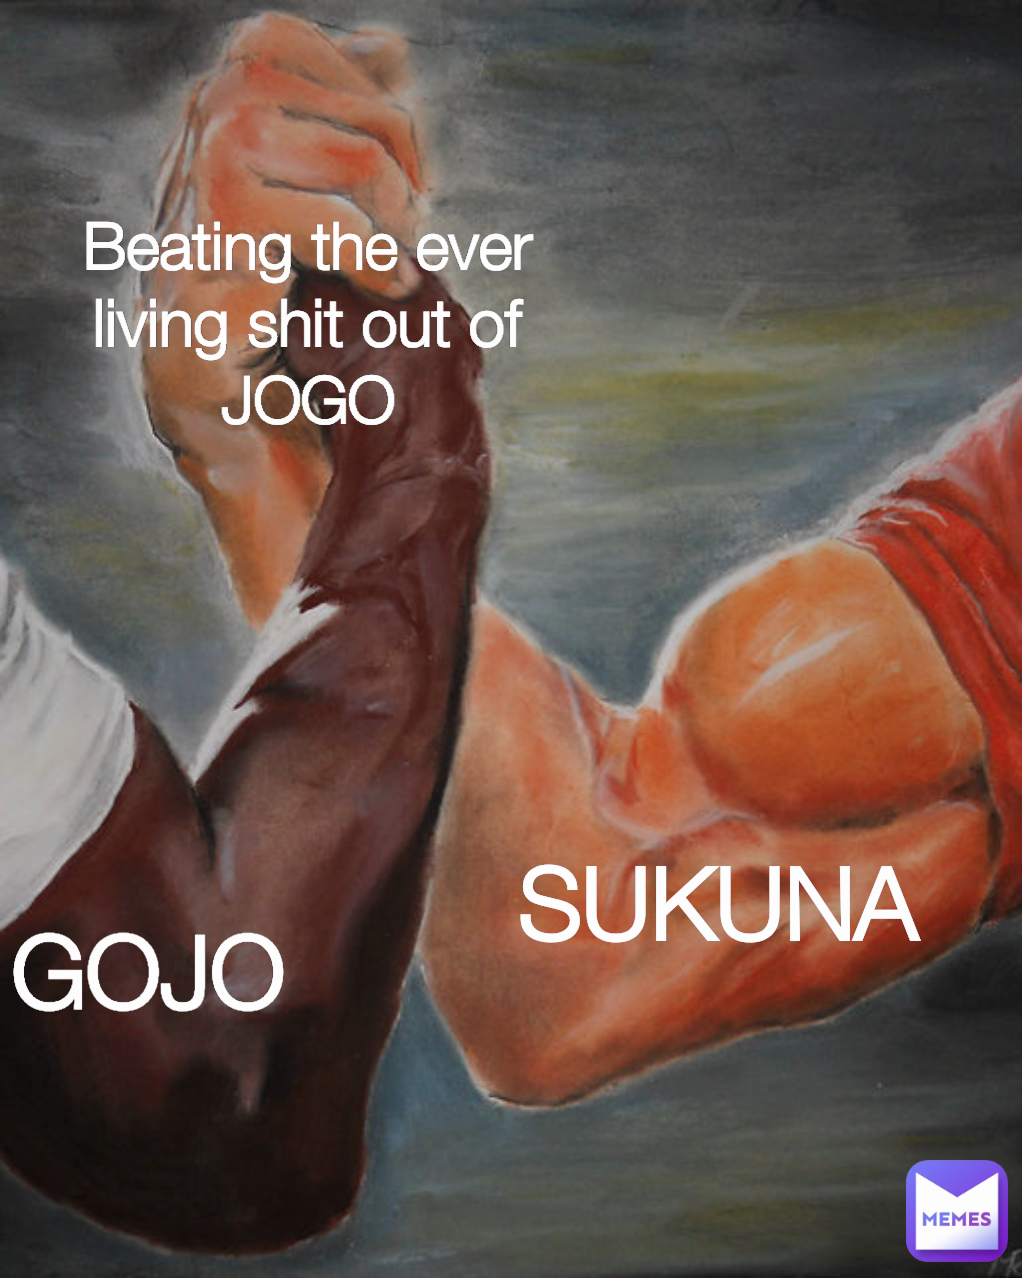 GOJO Beating the ever living shit out of JOGO SUKUNA